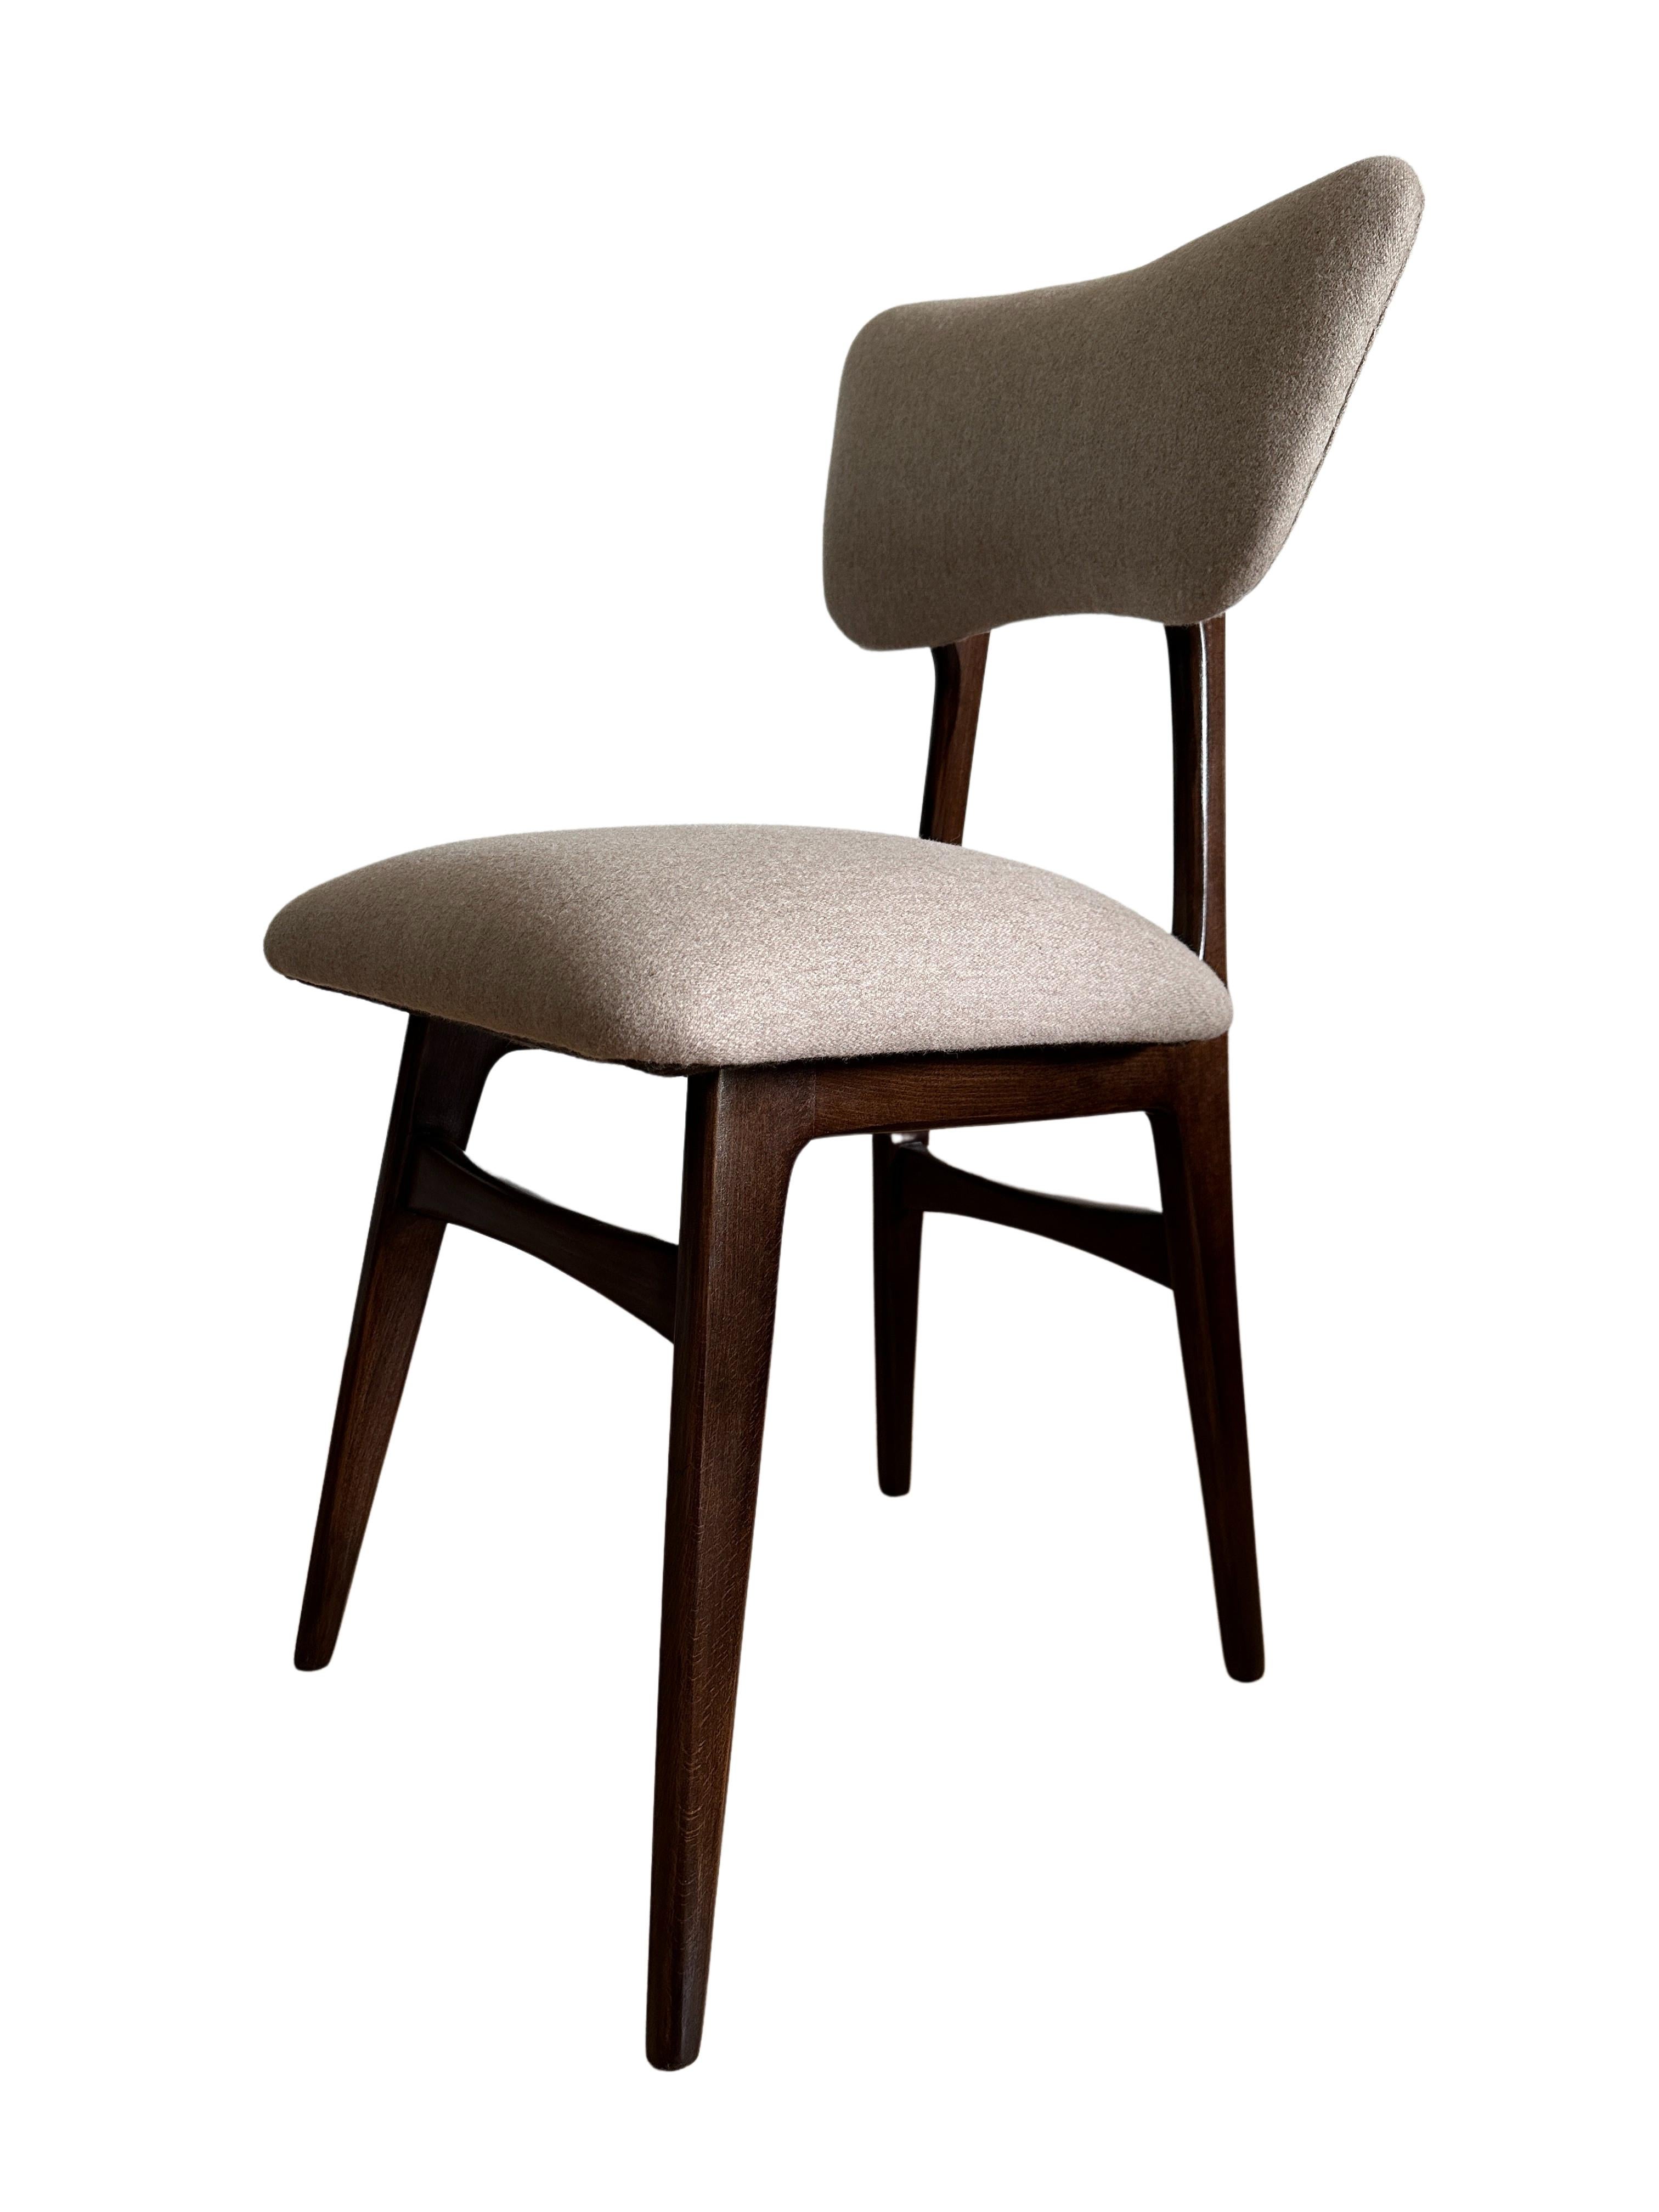 Set of 6 Midcentury Dining Chairs in Beige Wool Upholstery, Poland, 1960s For Sale 1